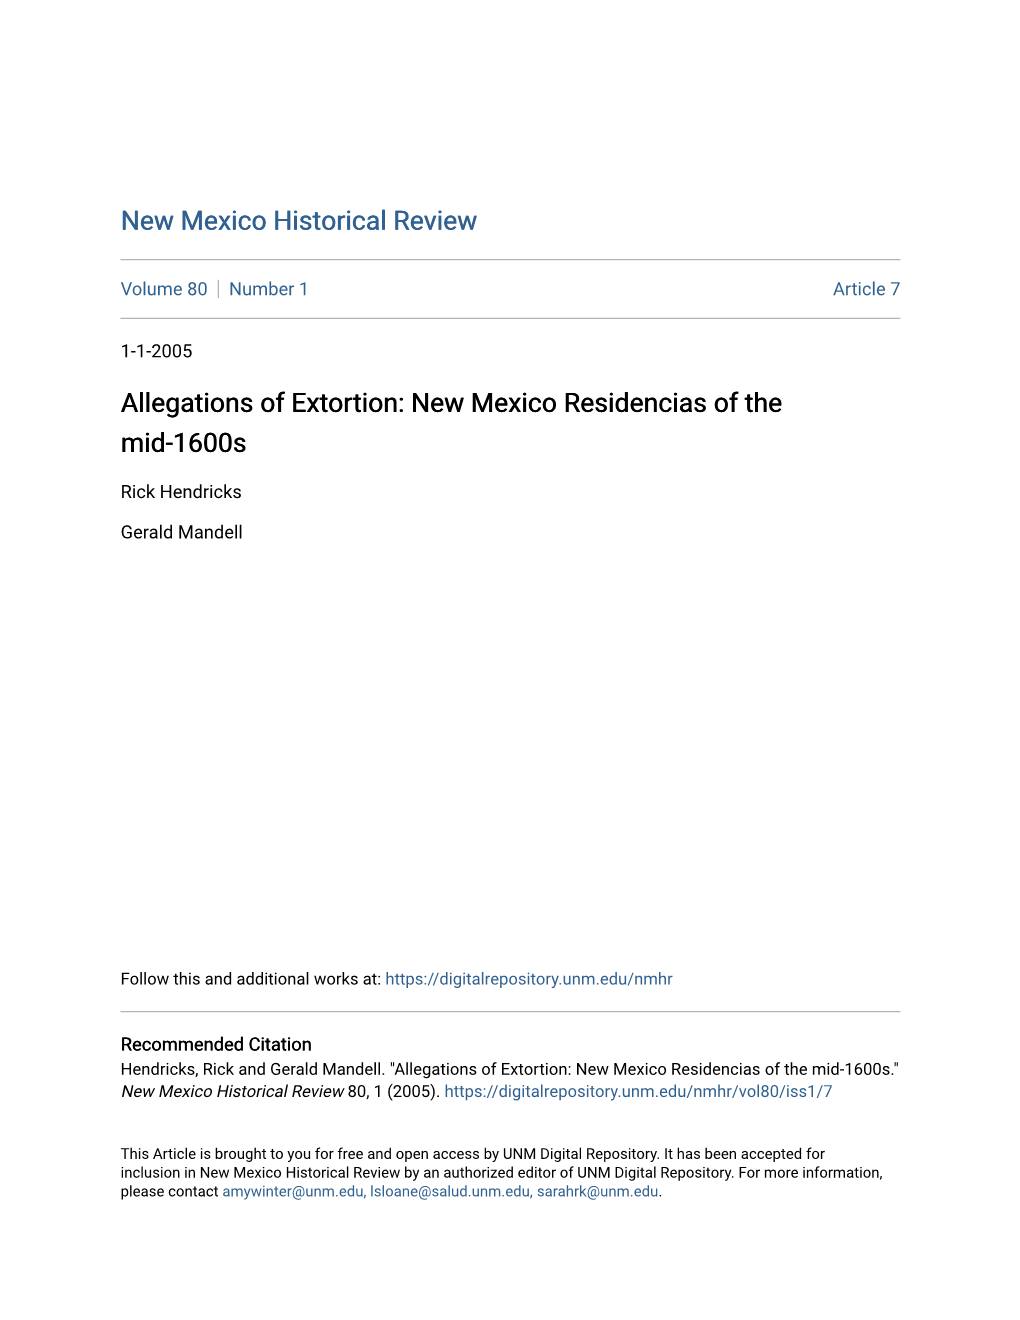 Allegations of Extortion: New Mexico Residencias of the Mid-1600S